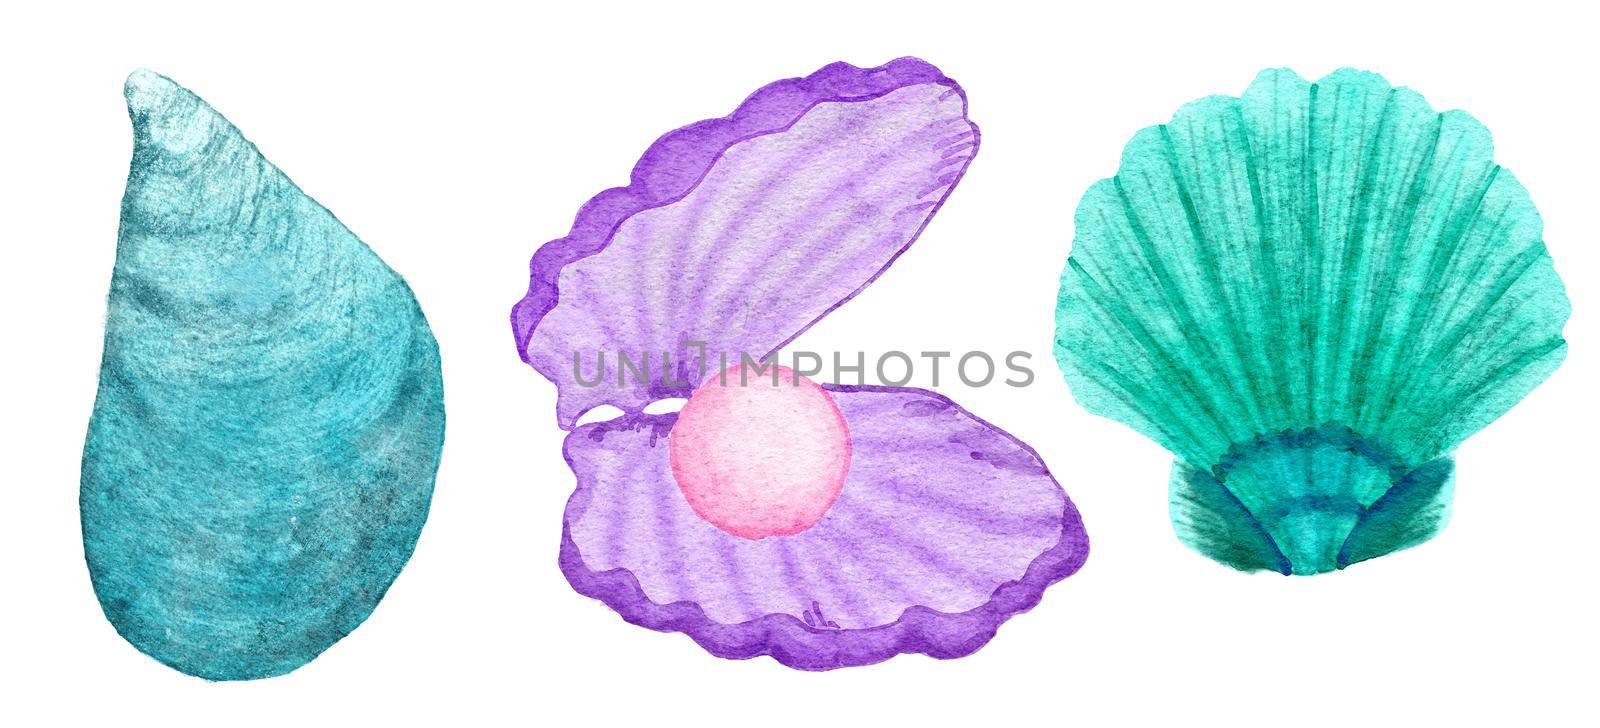 Watercolor illustration of shells, clam shell in blue turquoise purple colors, ocean sea underwater wildlife animals. Nautical summer beach design, coral reef life nature